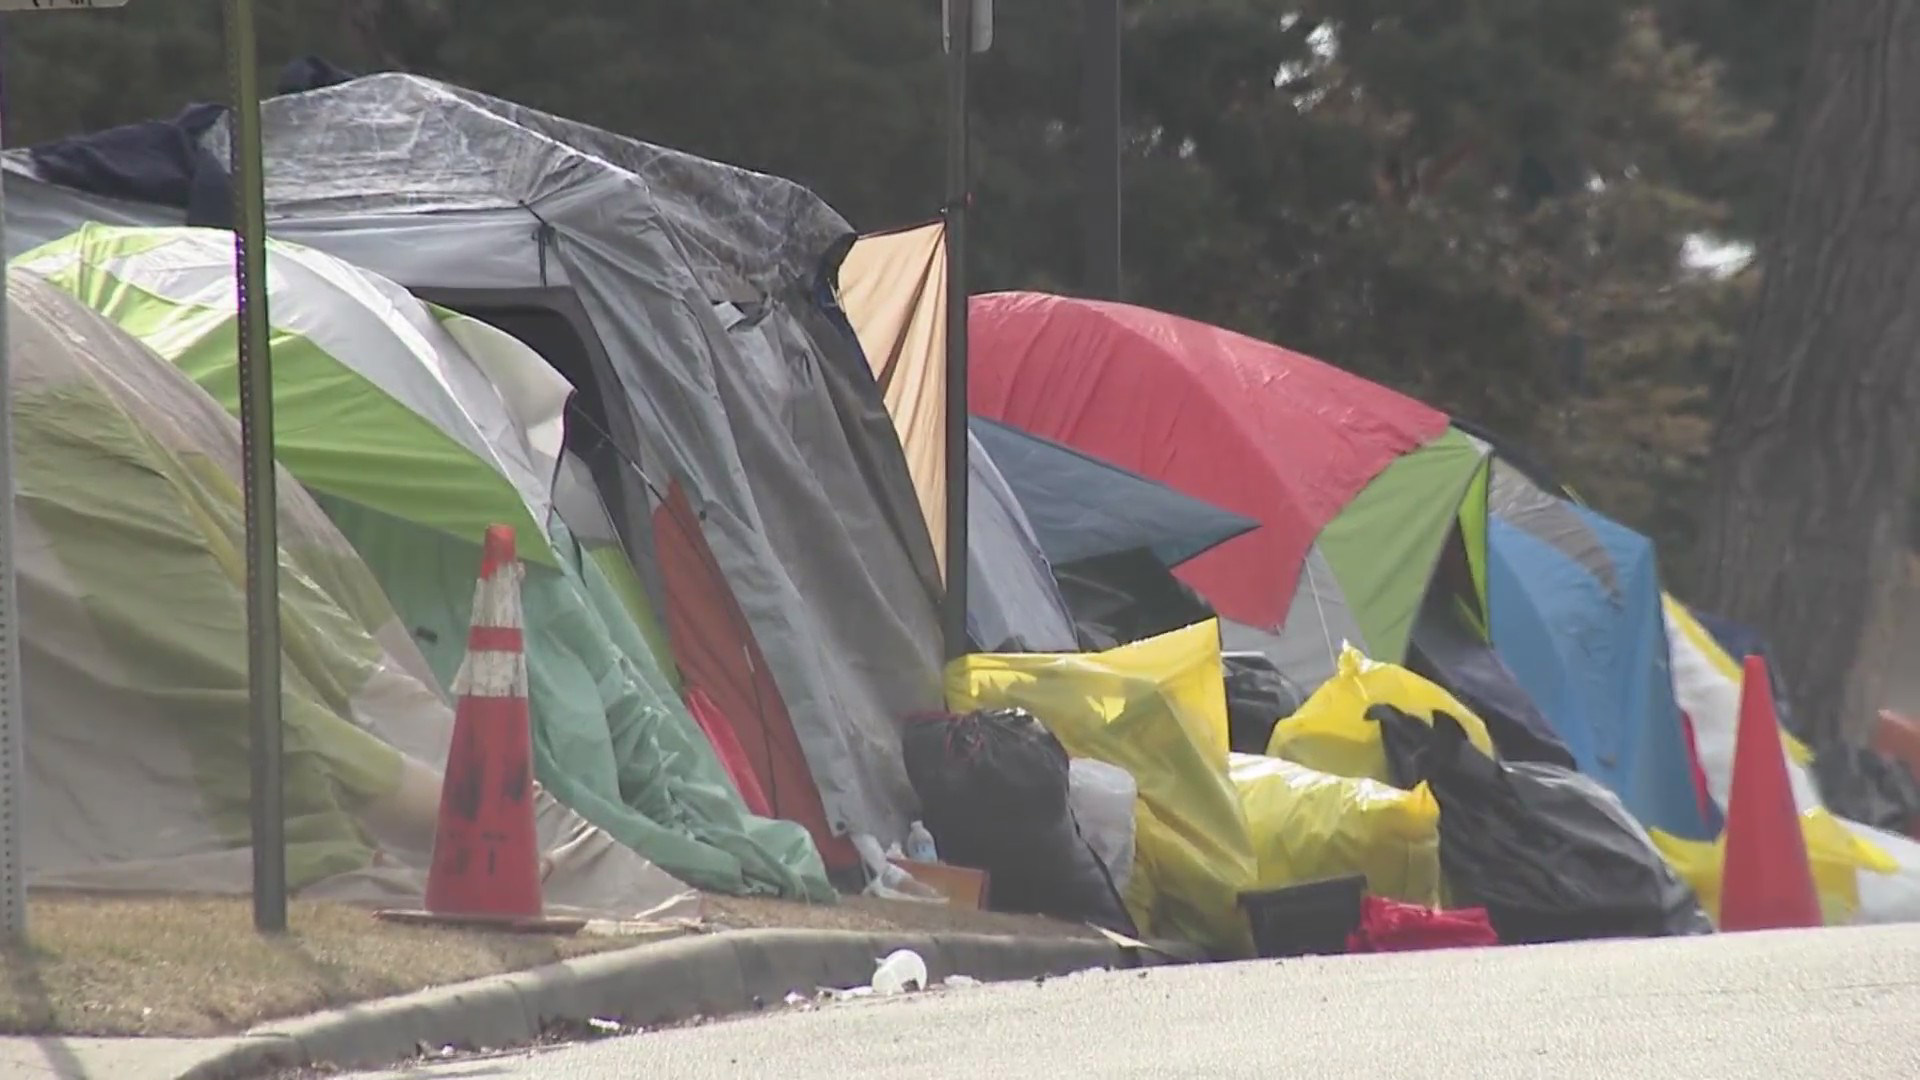 Migrant advocates seek tents, donated gear from swept encampment